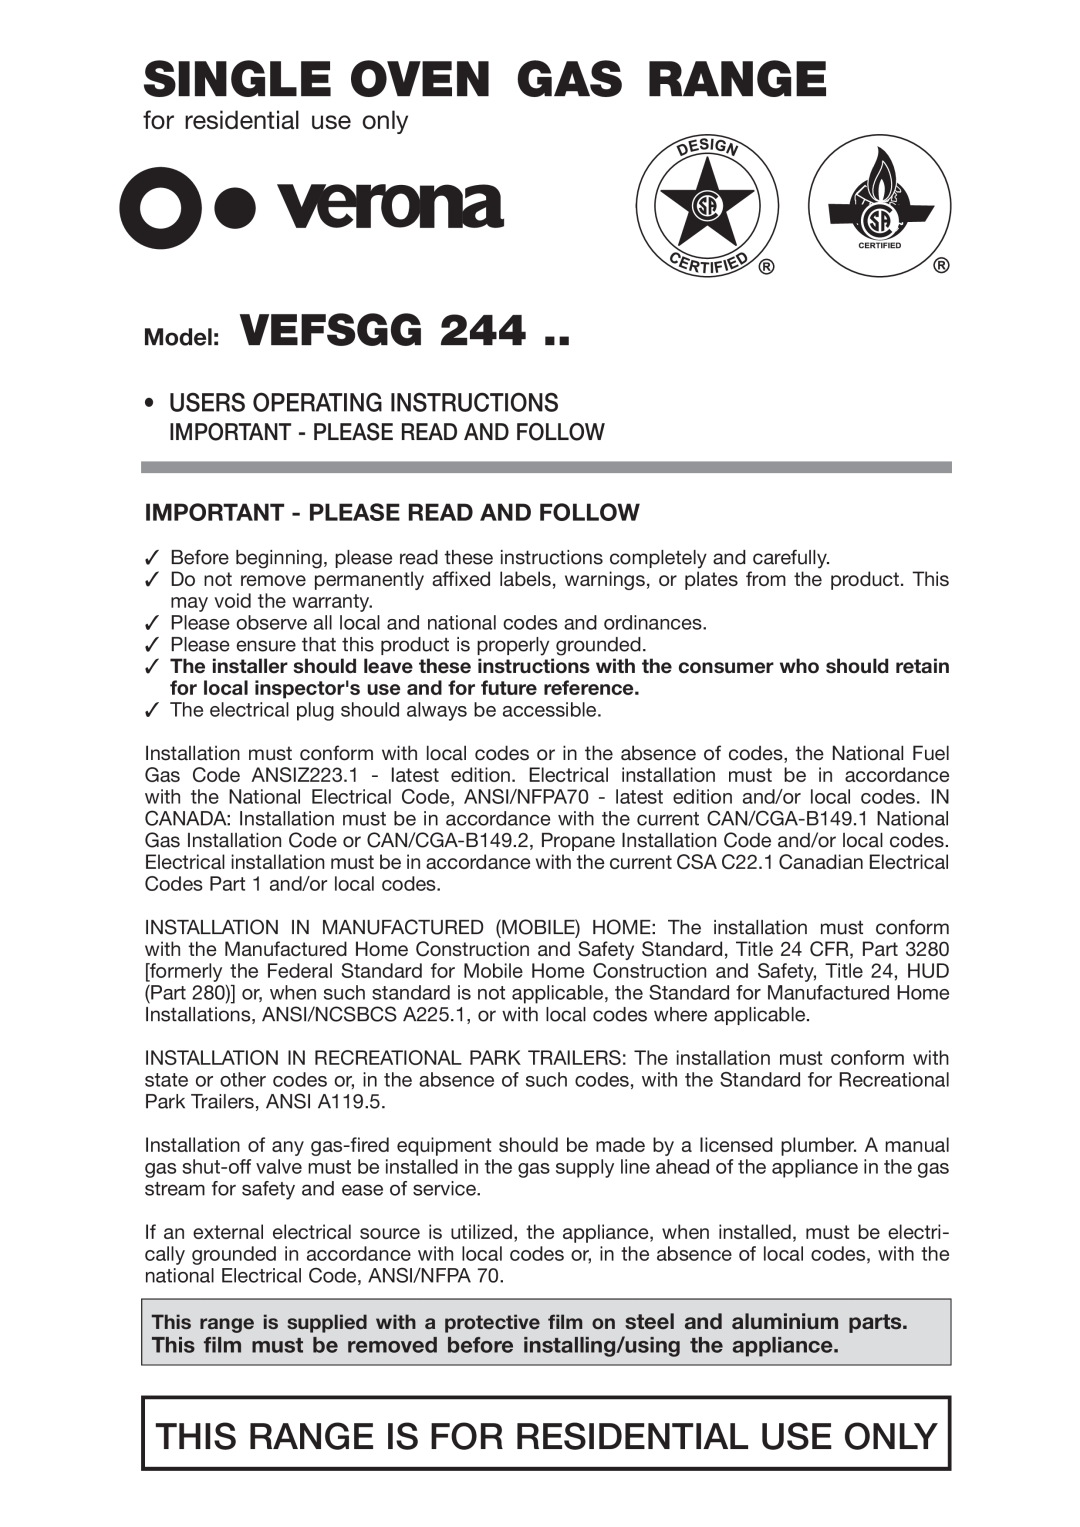 Verona VEFSGG 244 warranty for residential use only, Users Operating Instructions, Important - Please Read And Follow 